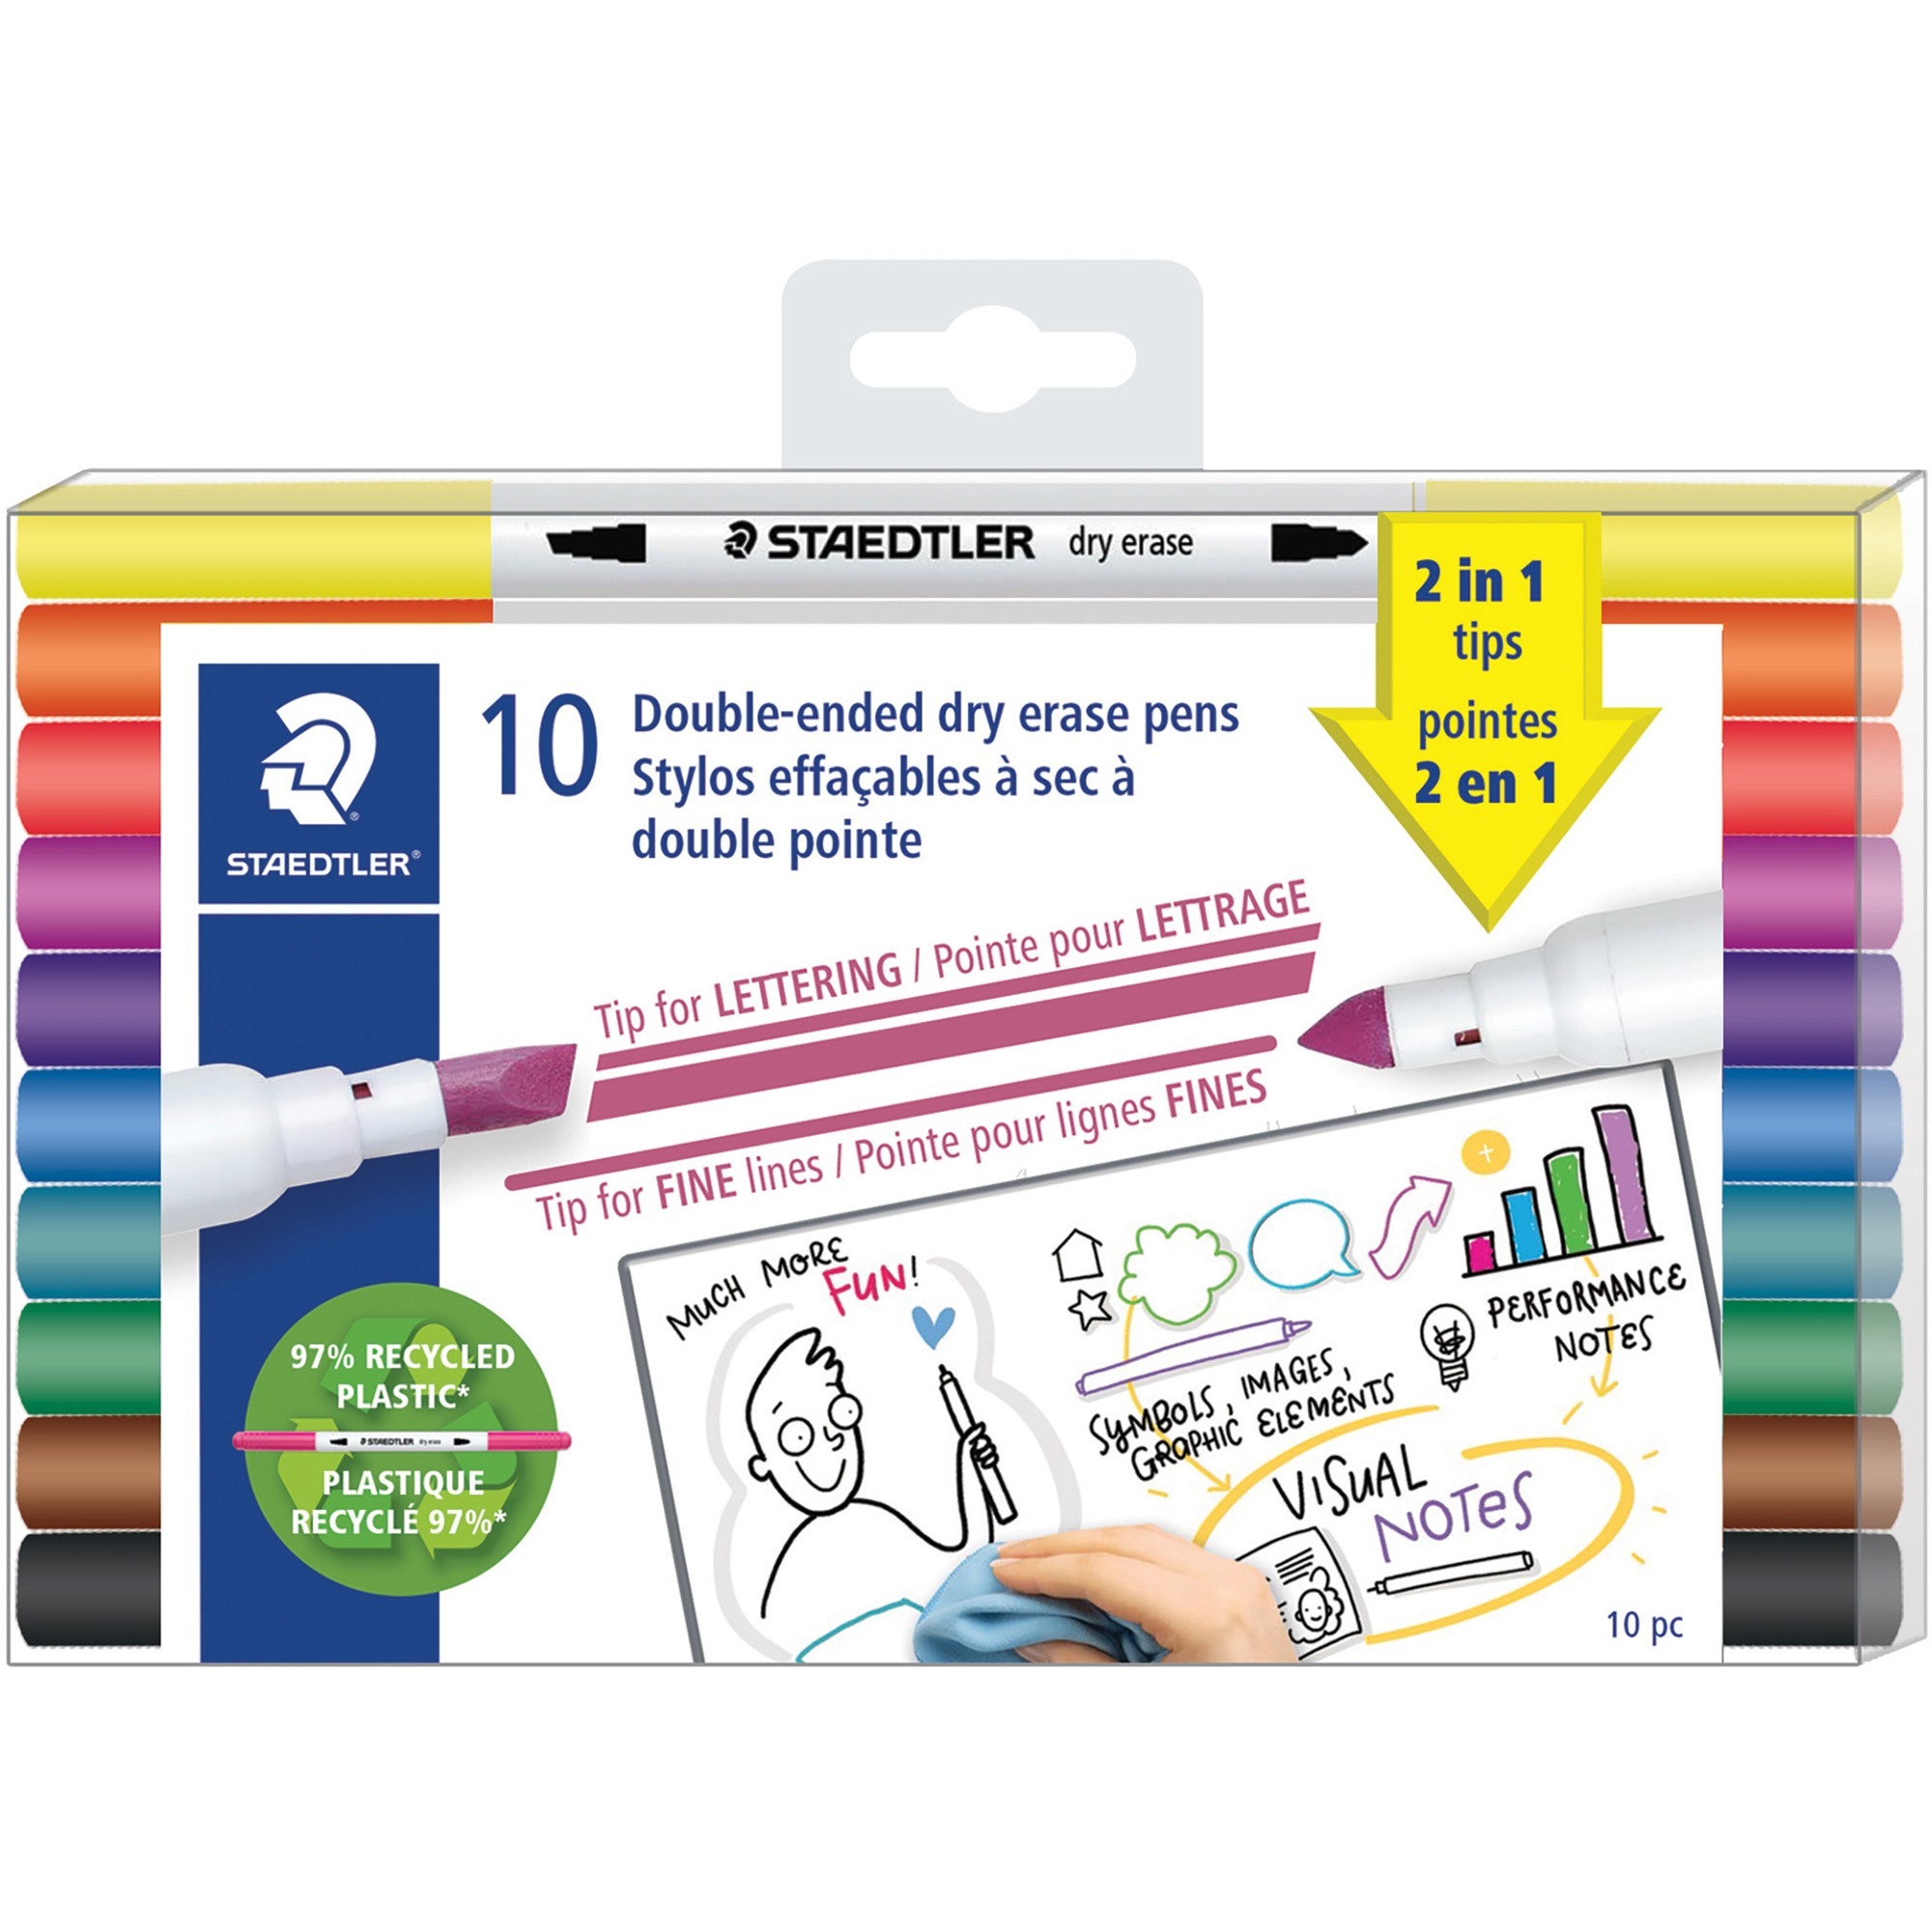 Staedtler Double-ended Dry Erase Pens (3010tb10a6) - 第 1/1 張圖片